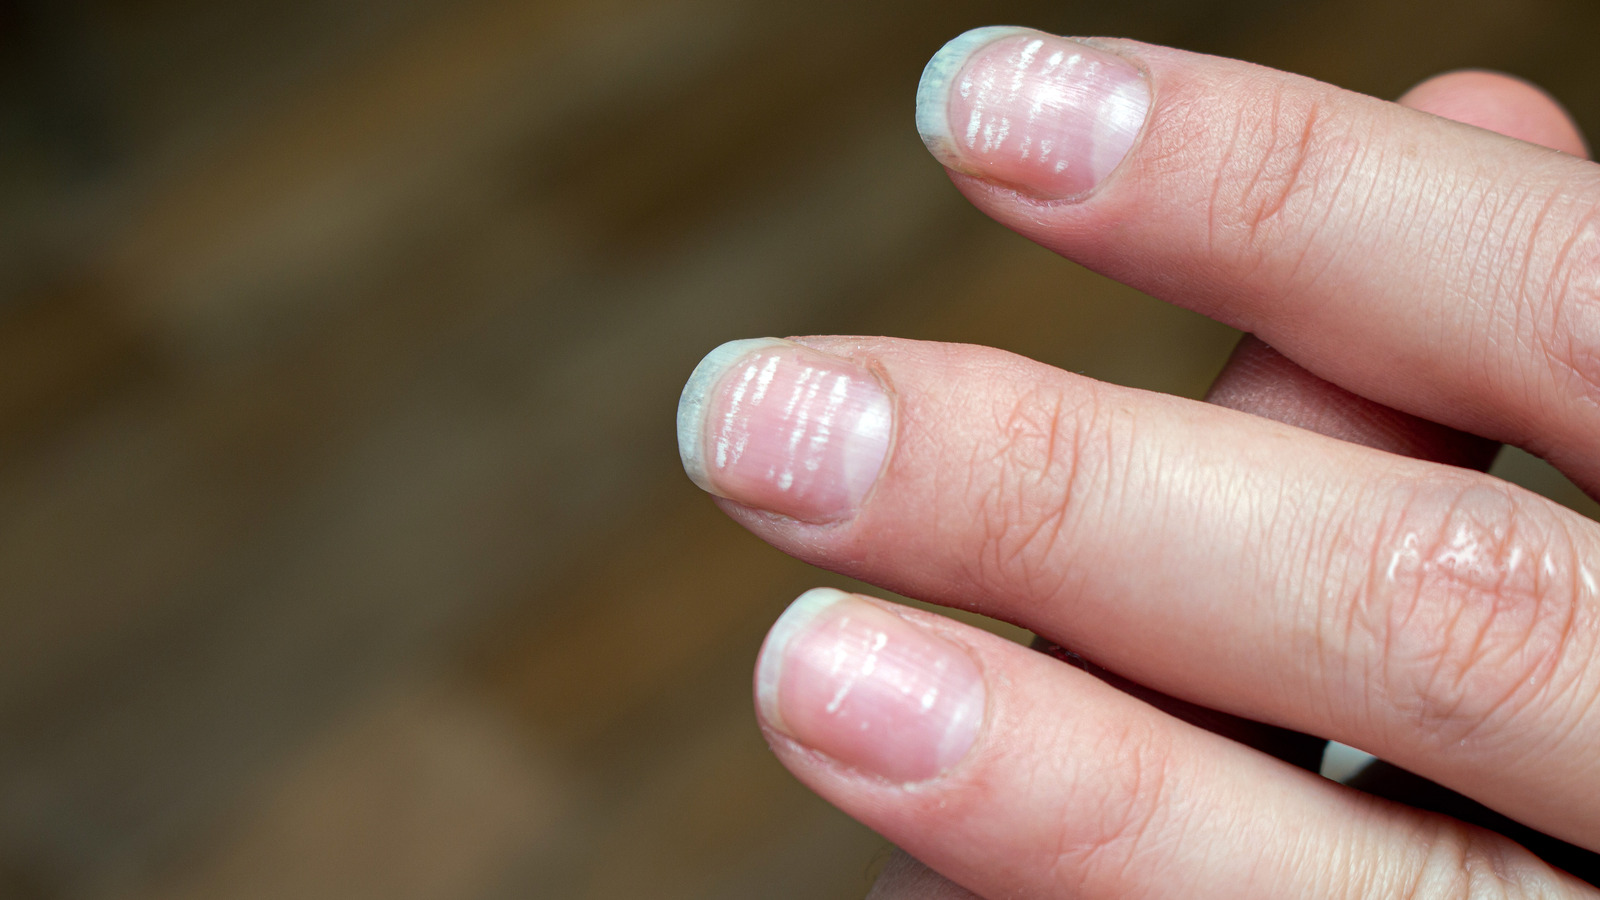 No half-moon on nails: What does it mean?